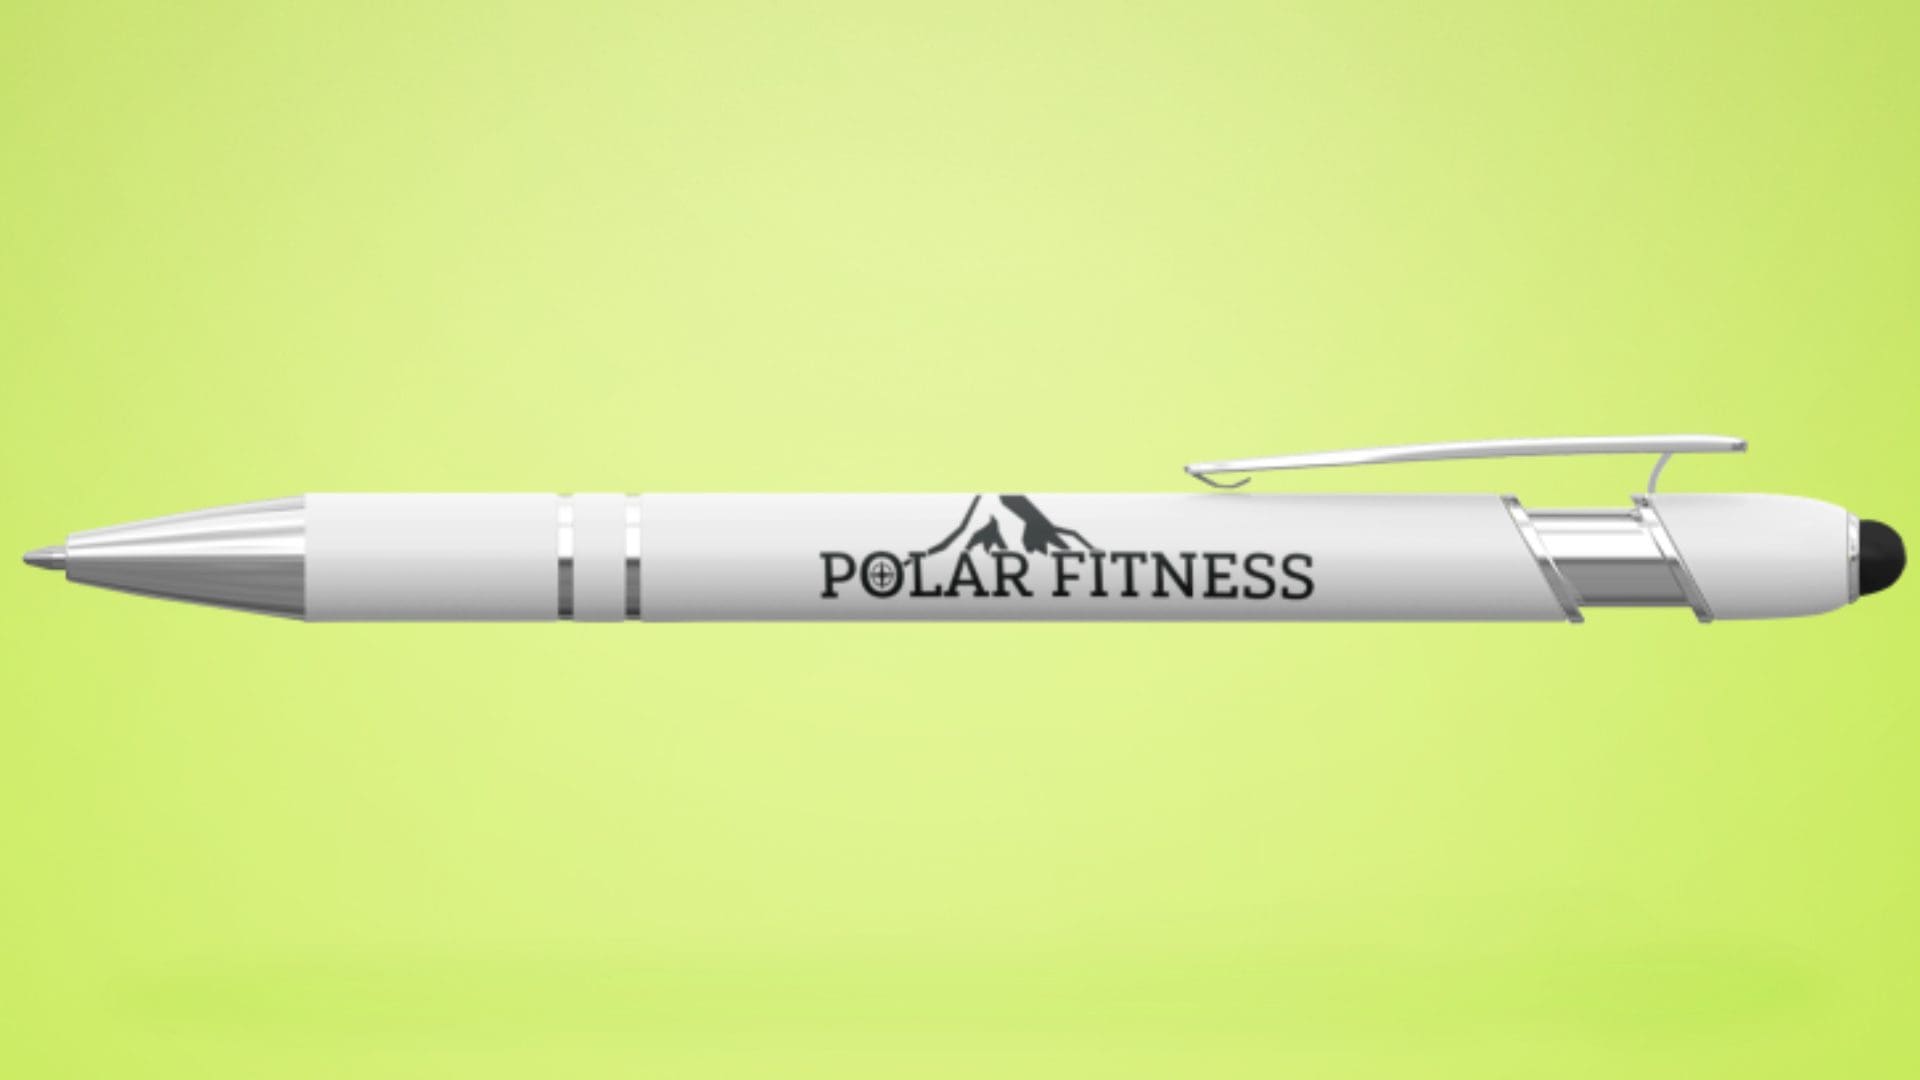 Polar Physical Therapy and Fitness - Belfast Pen Mockup 05